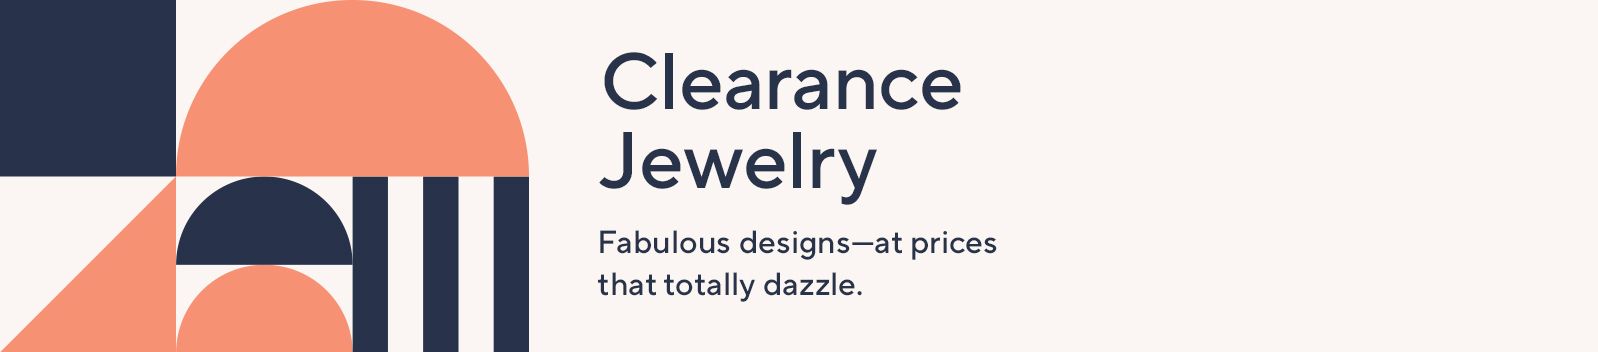 Clearance Jewelry - Fabulous designs—at prices that totally dazzle.